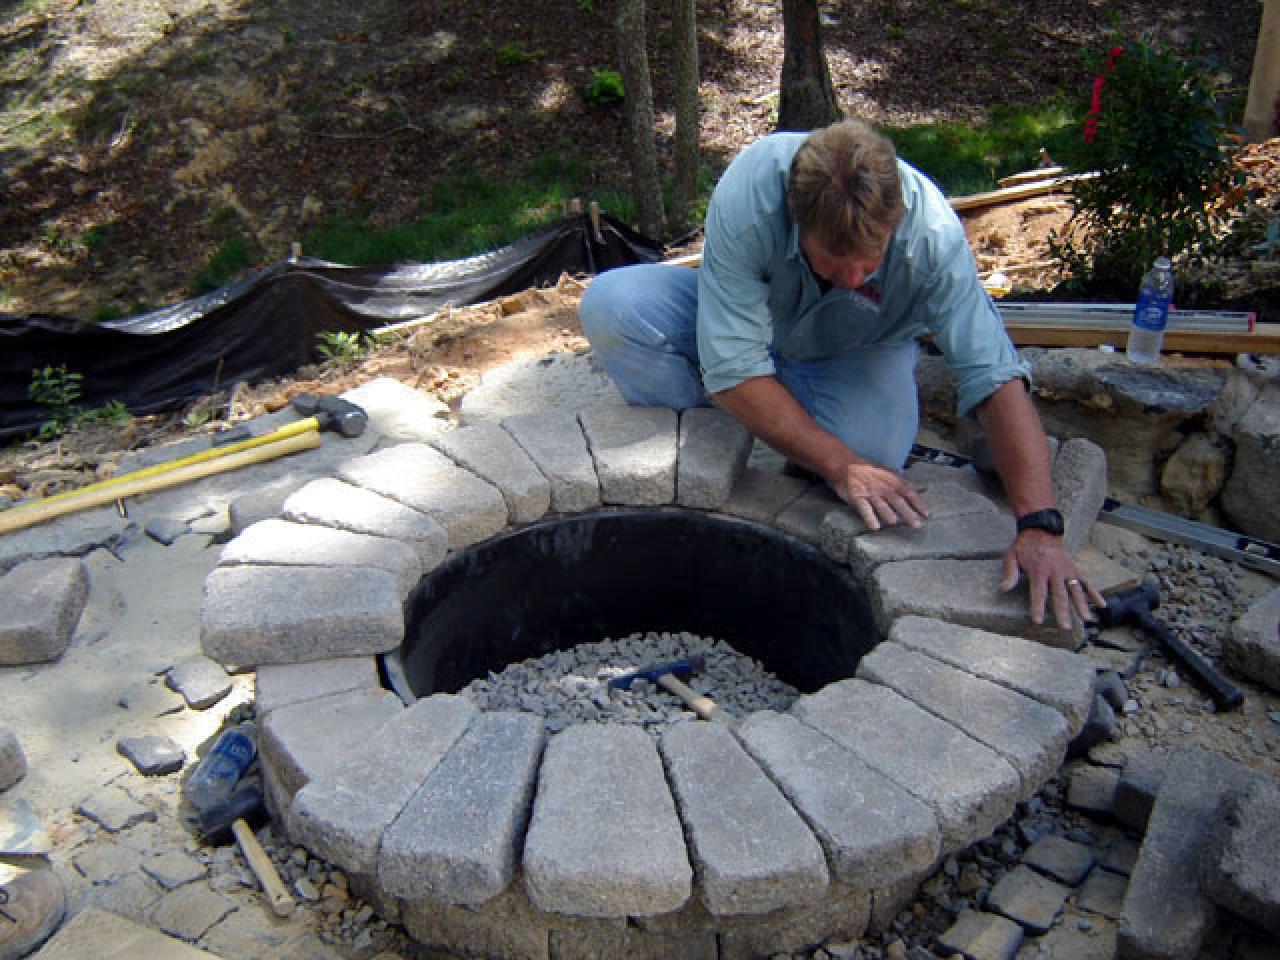 How To Build a Round Stone Fire Pit | how-tos | DIY